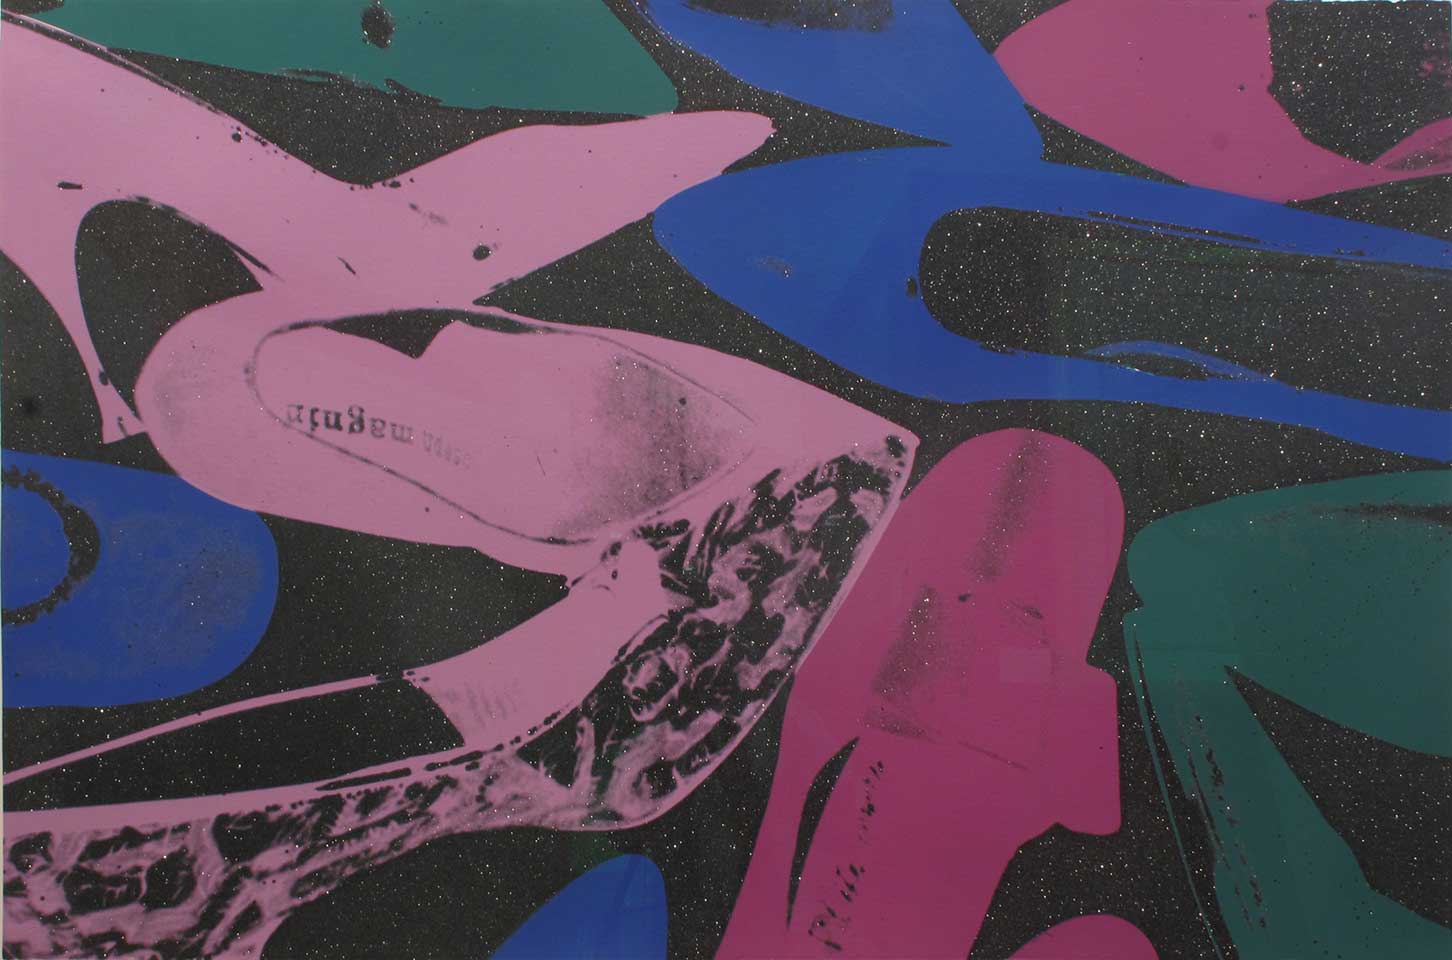 Andy Warhol's Shoes